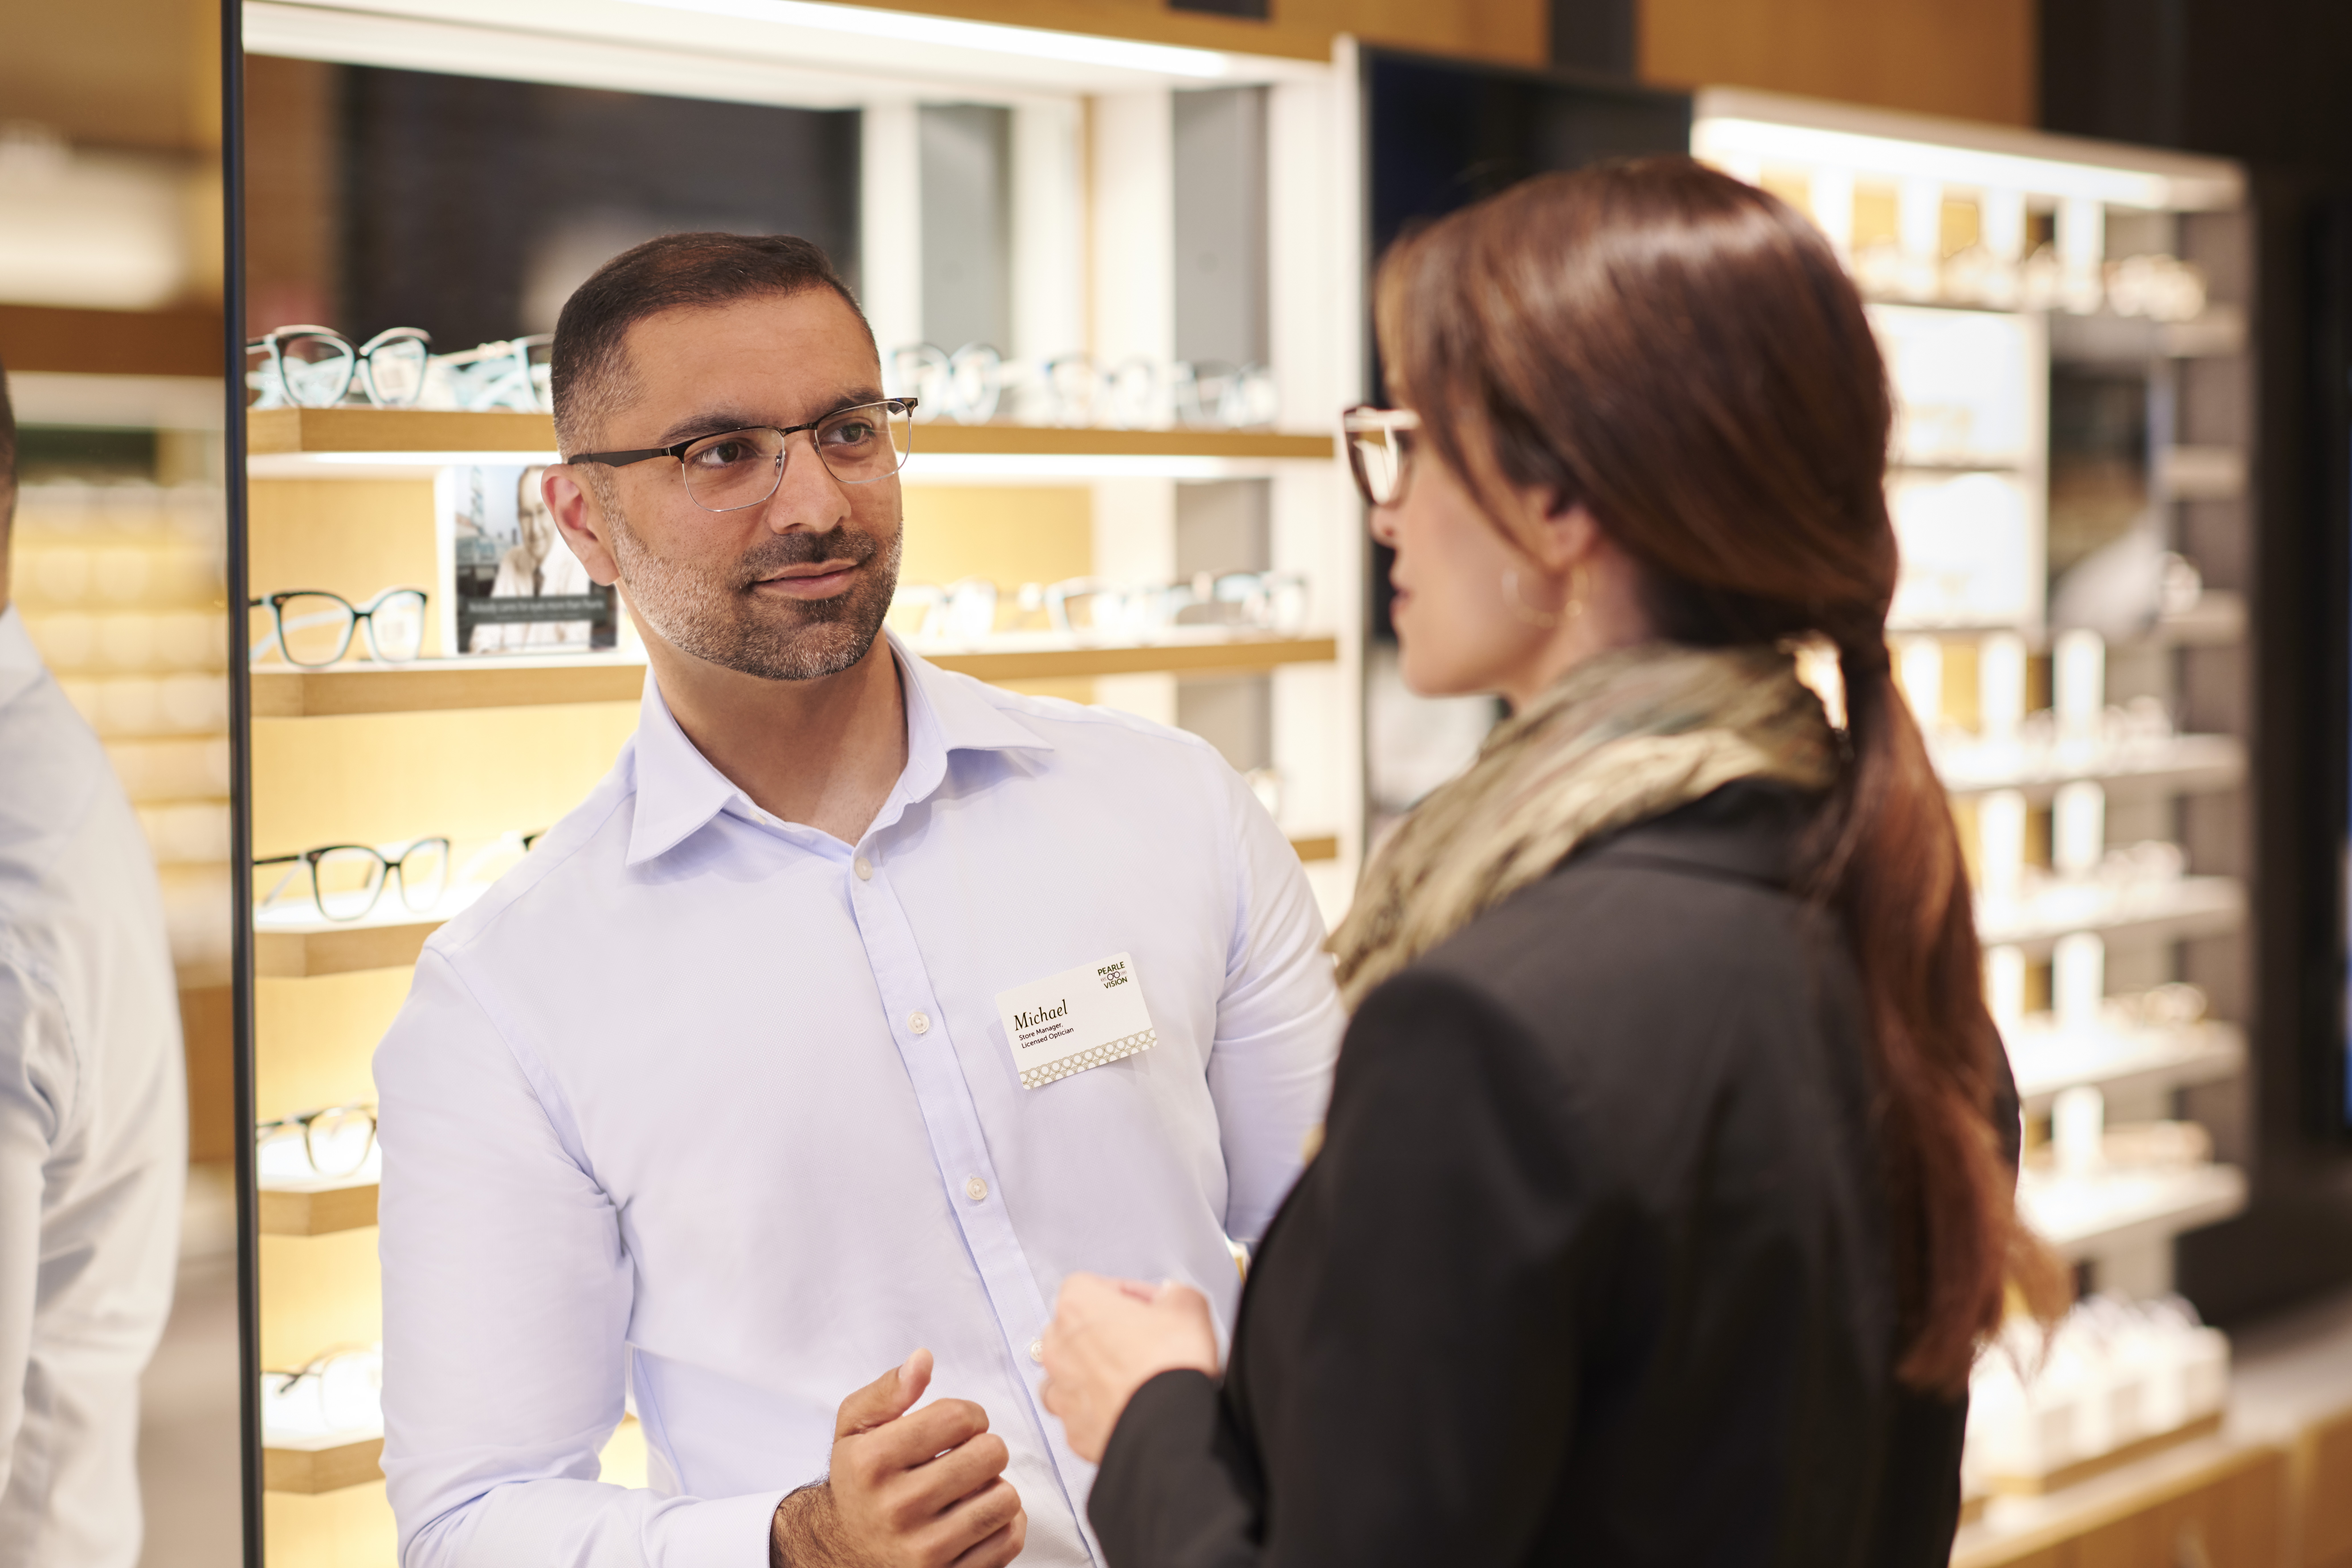 A customer smiles while trying on a pair of glasses in a Pearle Vision EyeCare Center. A store associate is also pictured out-of-focus in the foreground.